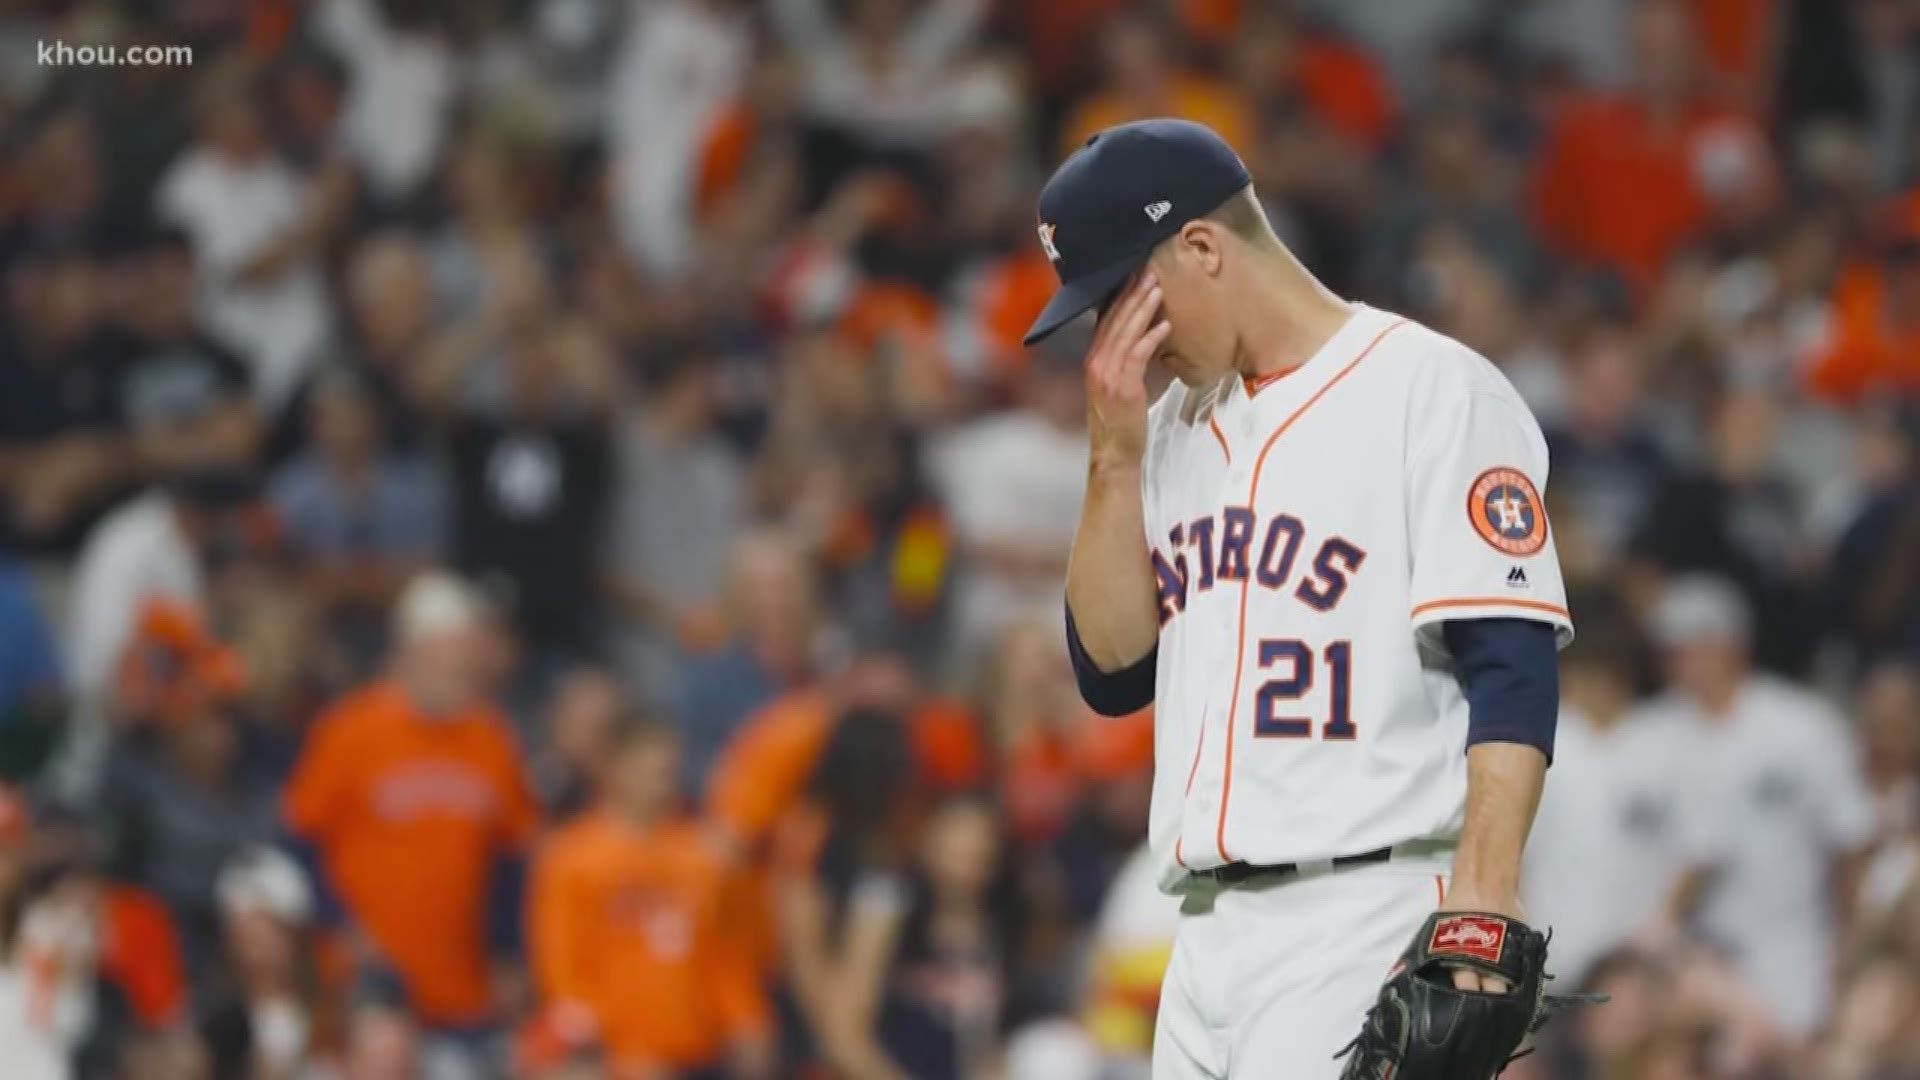 Greinke is a powerhouse on the mound, but behind his pitching dominance, the Astros star battles social anxiety.